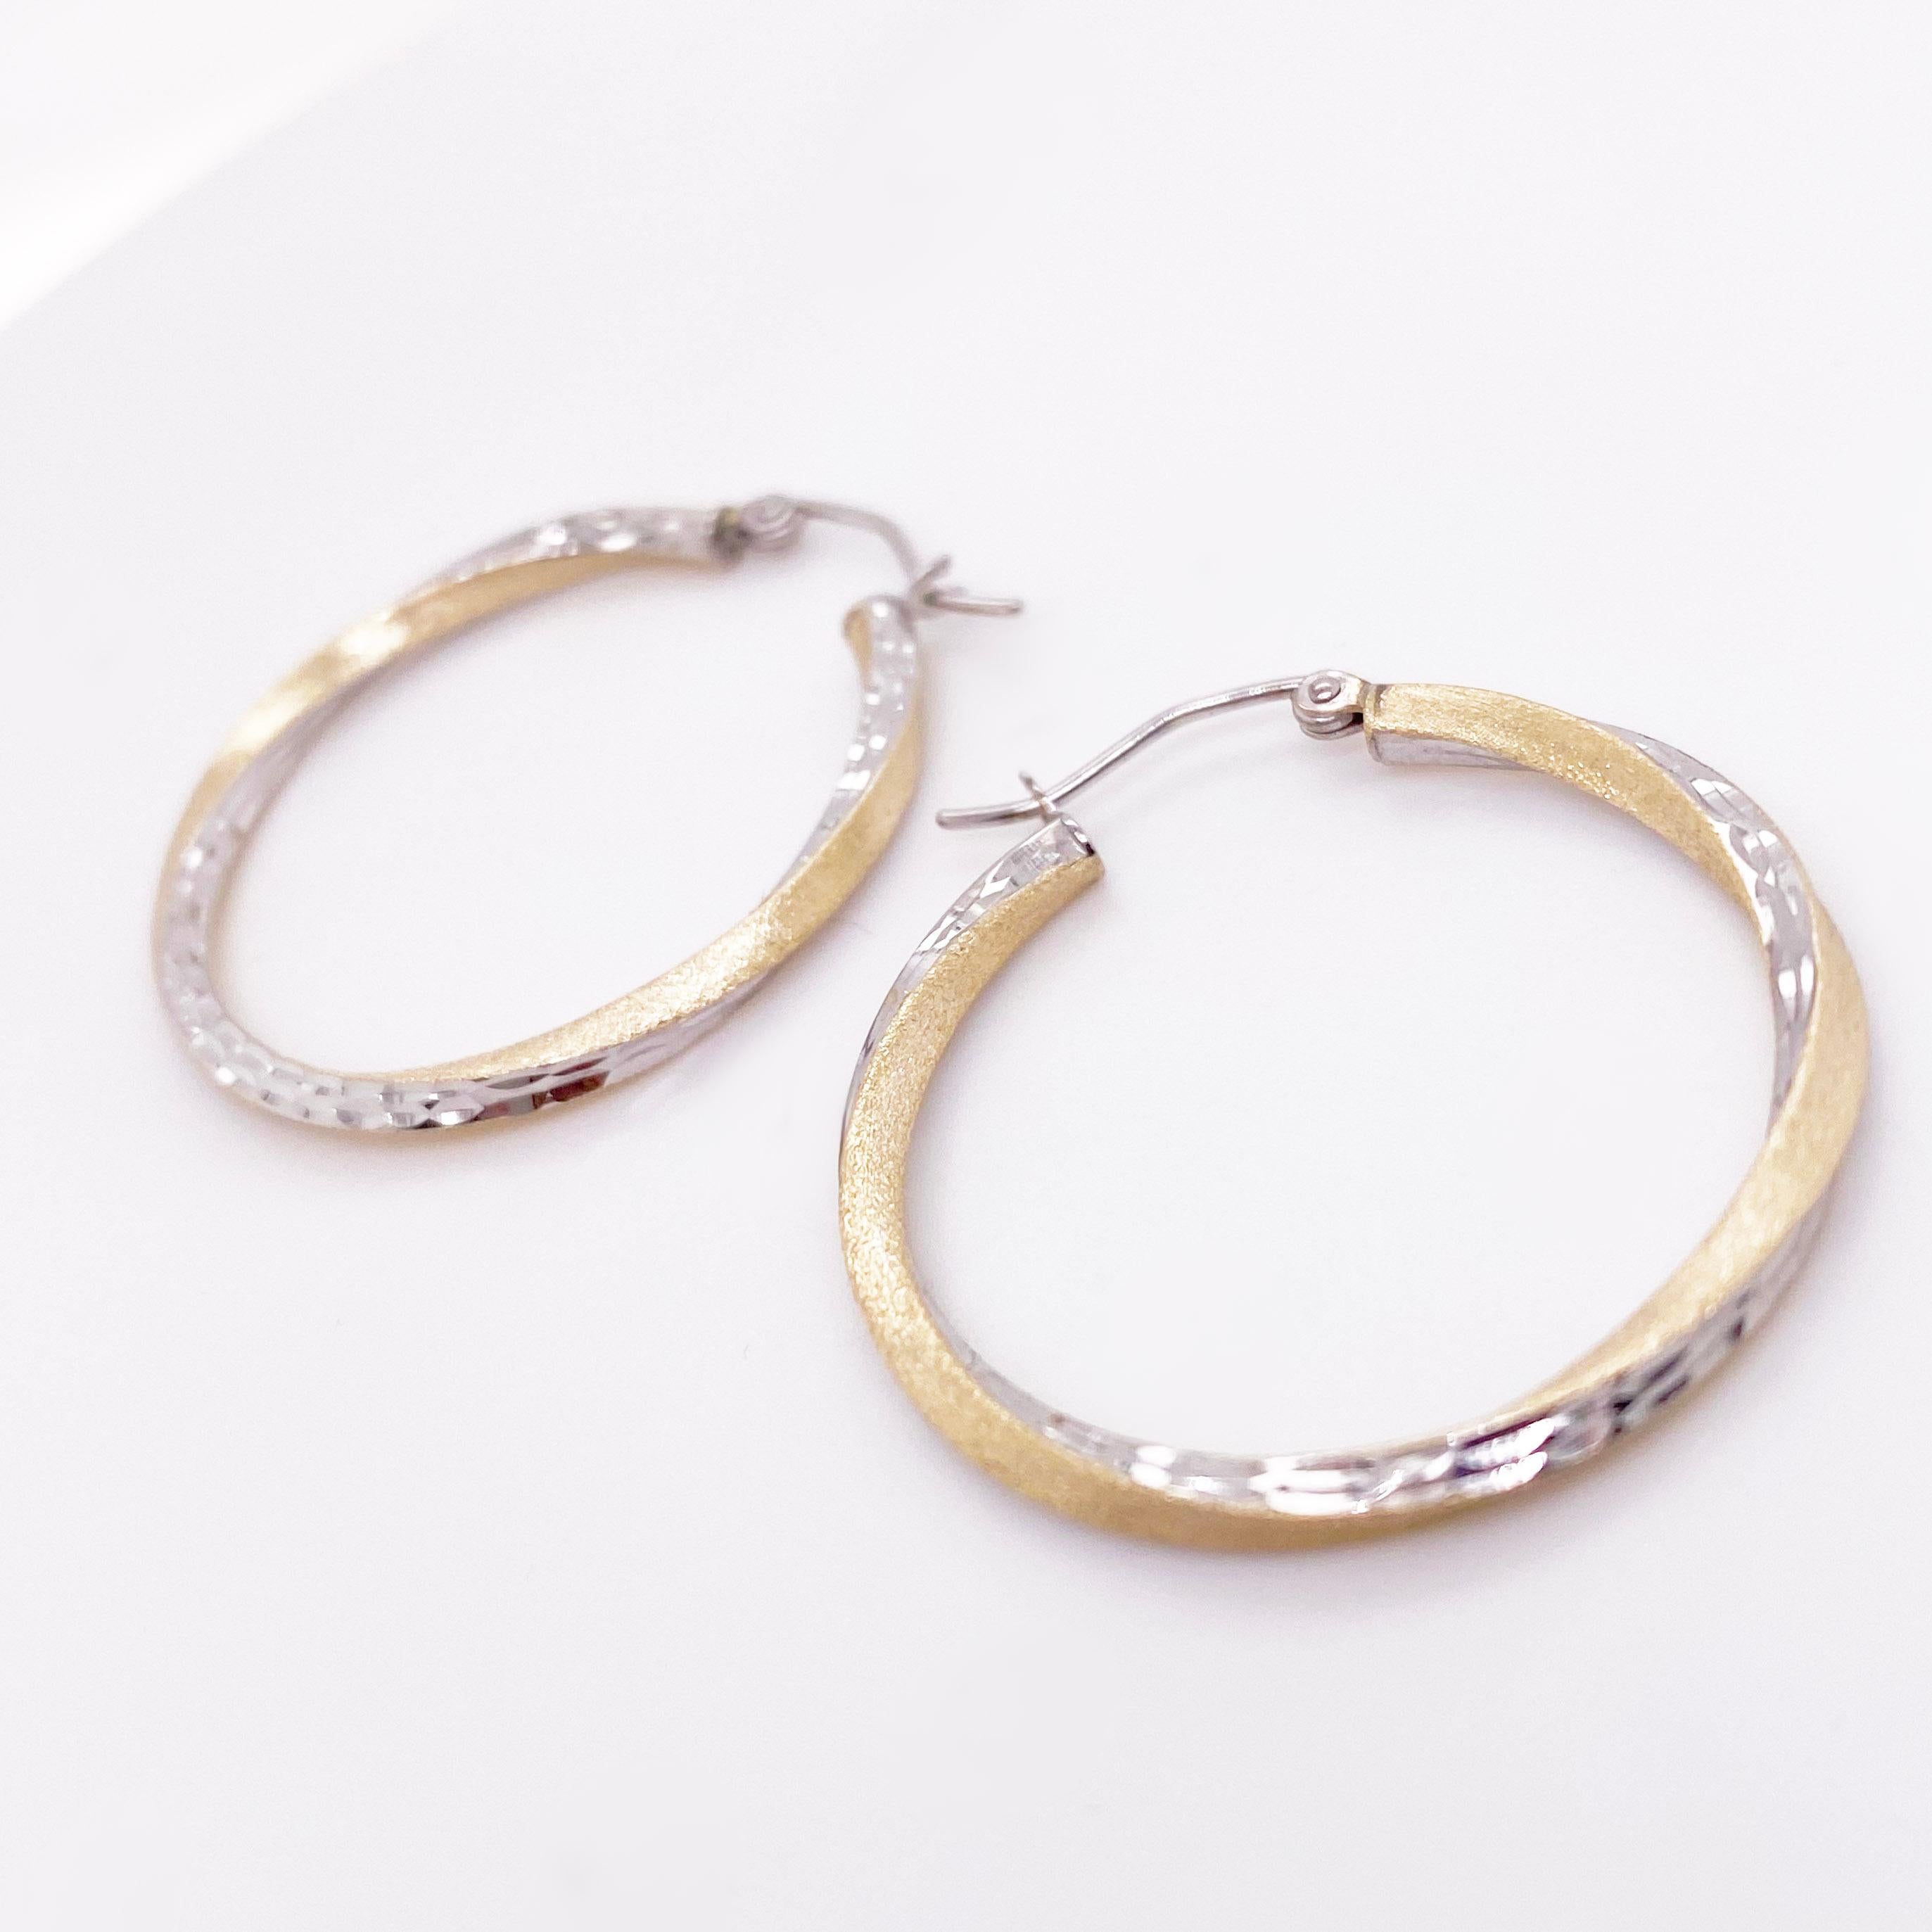 Gold hoop earrings are a staple in fine jewelry! These classic earrings are timeless and upgrade any outfit! The 14 karat yellow gold and white gold hoops are lightweight and comfortable to wear. They have a high polish white gold finish and satin